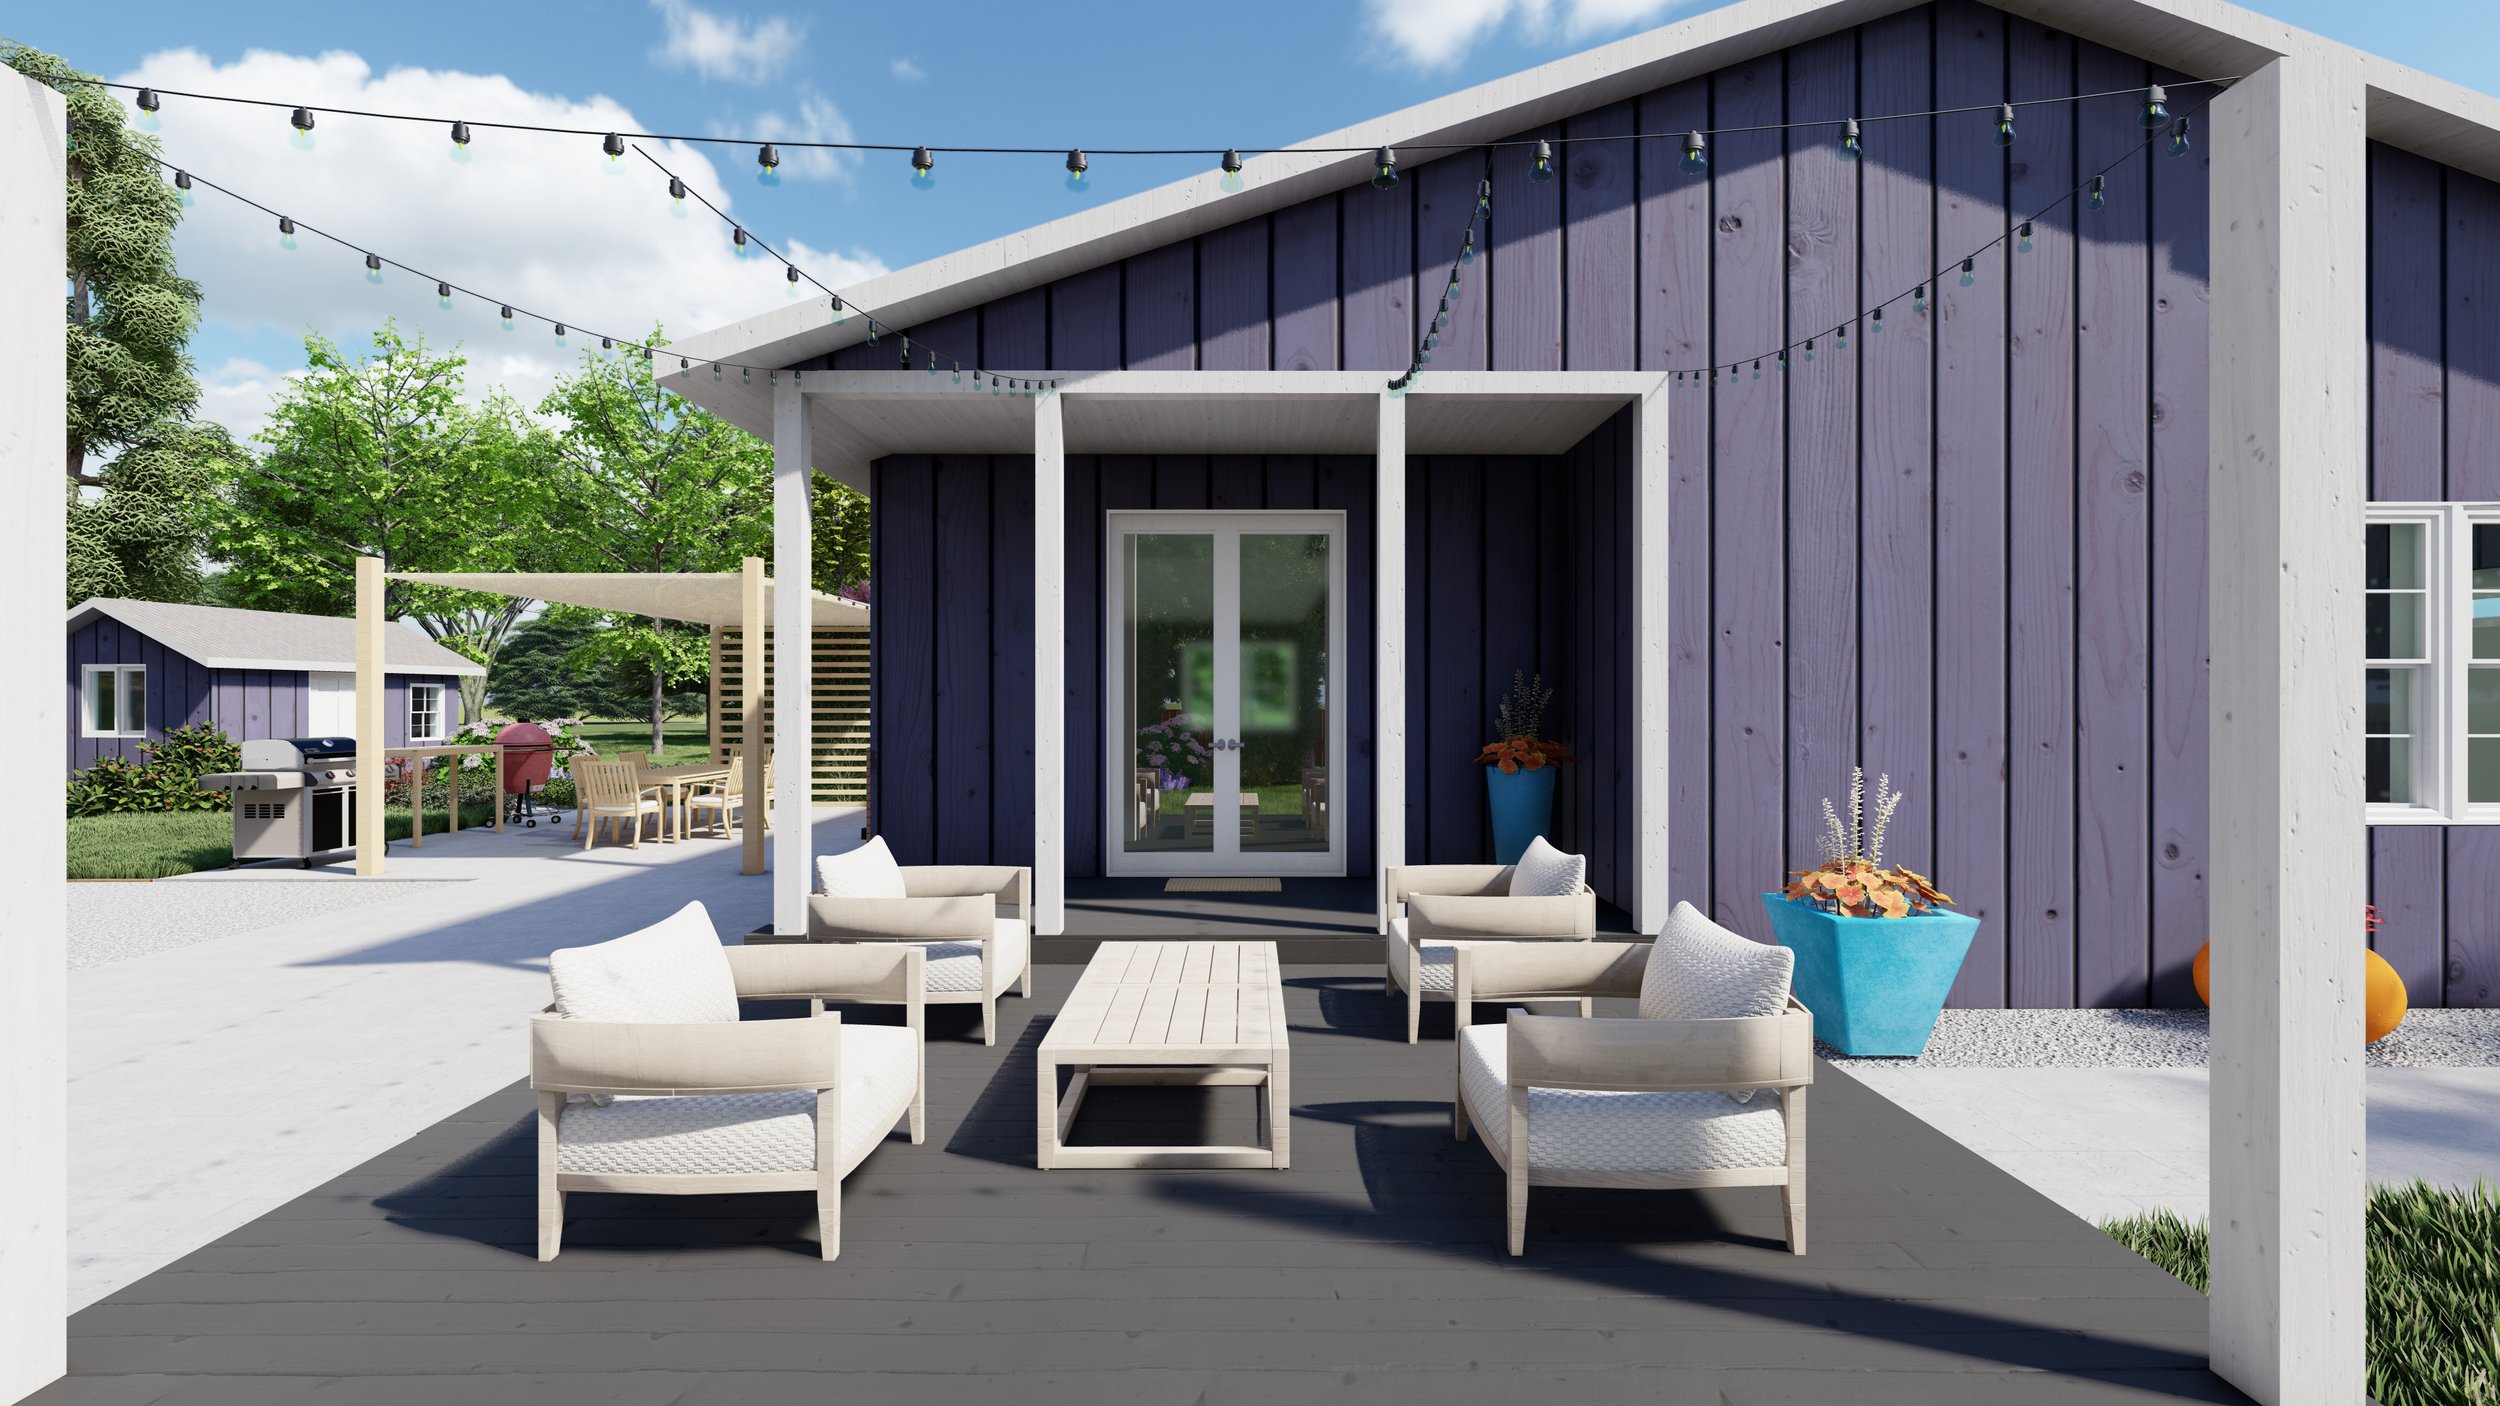 A Yardzen design for a client in Poulsbo, WA with a backyard seating area created with four Balmain lounge chairs and coffee table.